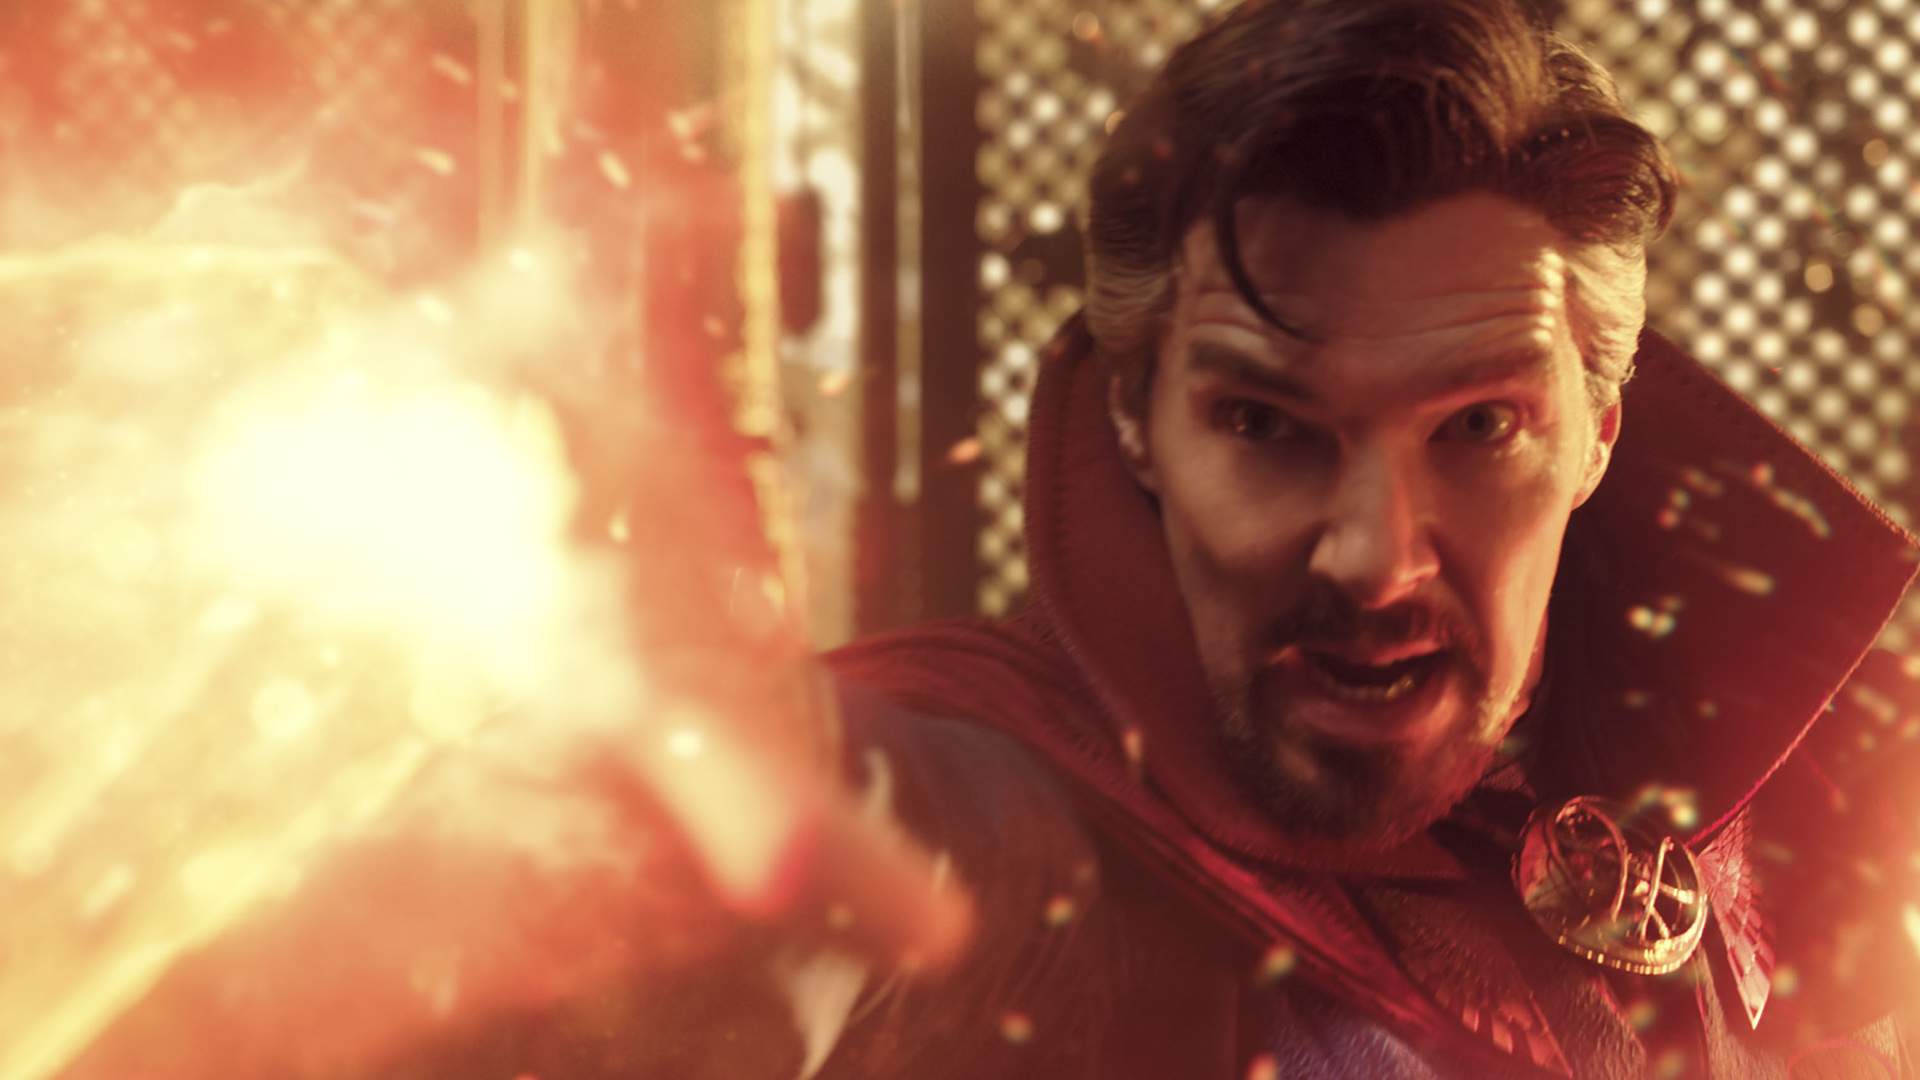 The Latest Trailer for 'Doctor Strange in the Multiverse of Madness' Teases a Huge Marvel Return